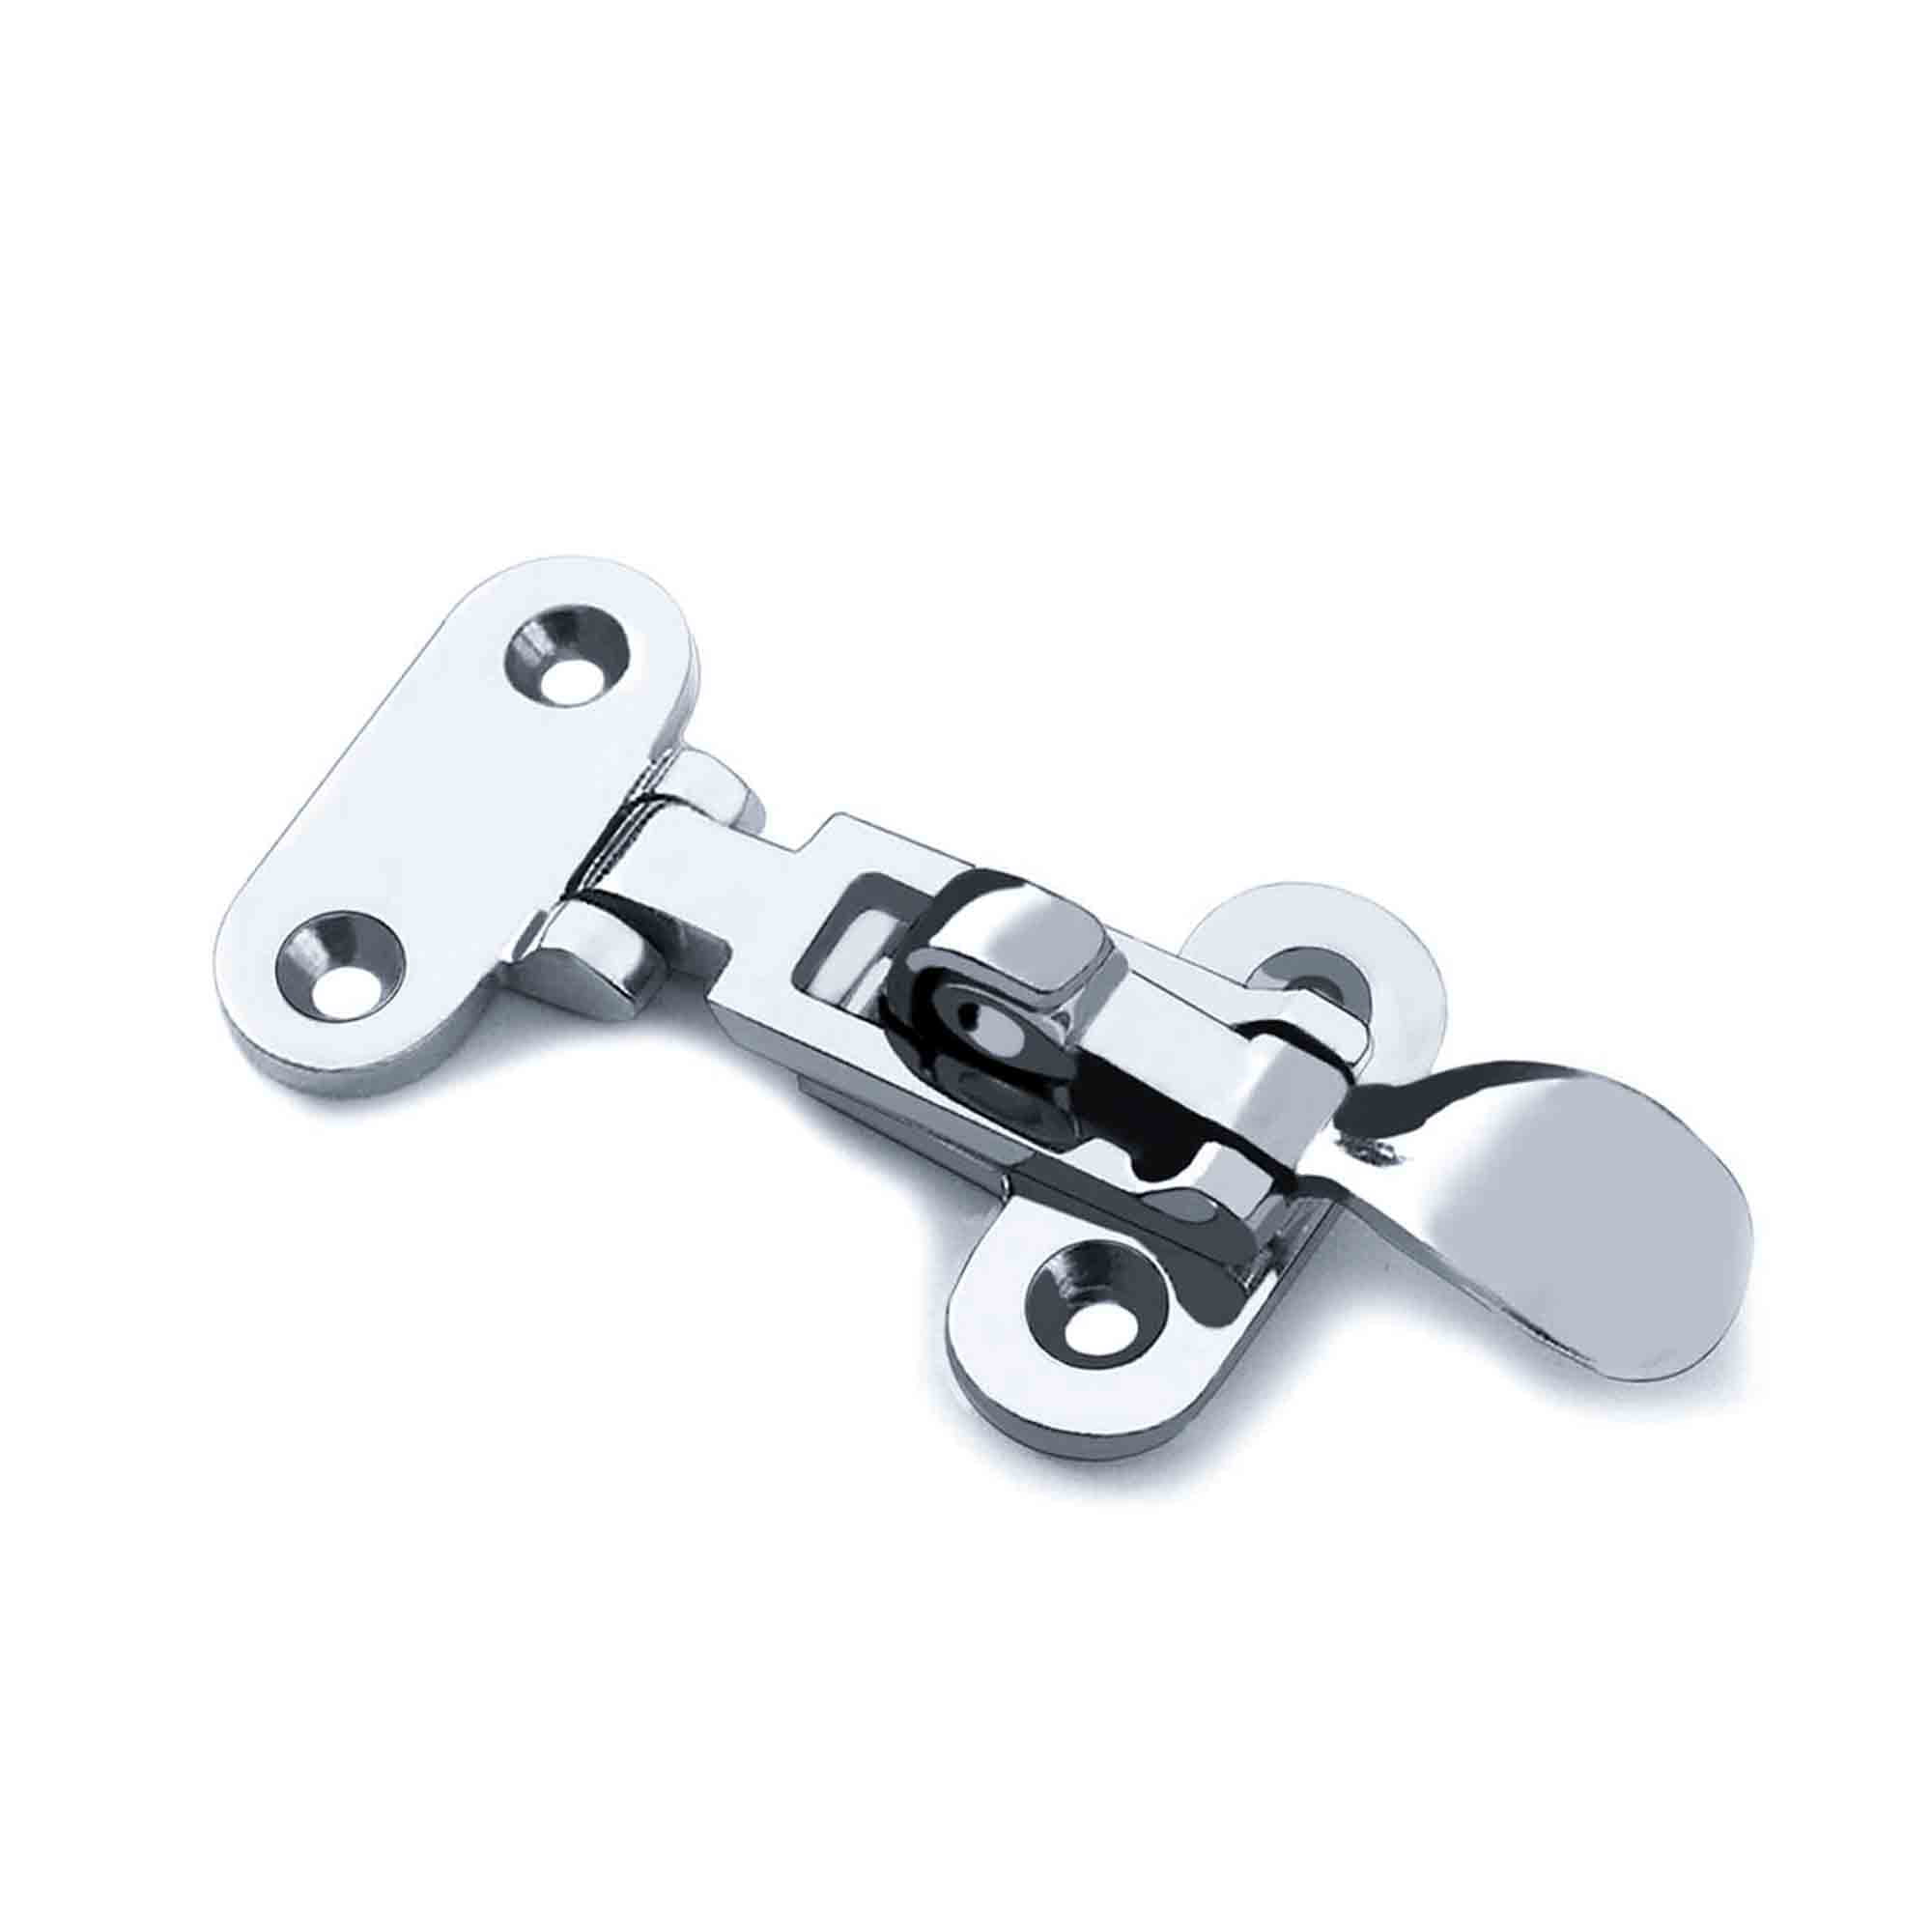 Five Oceans Boat Stainless Steel Lockable Hold-Down Clamp FO-375